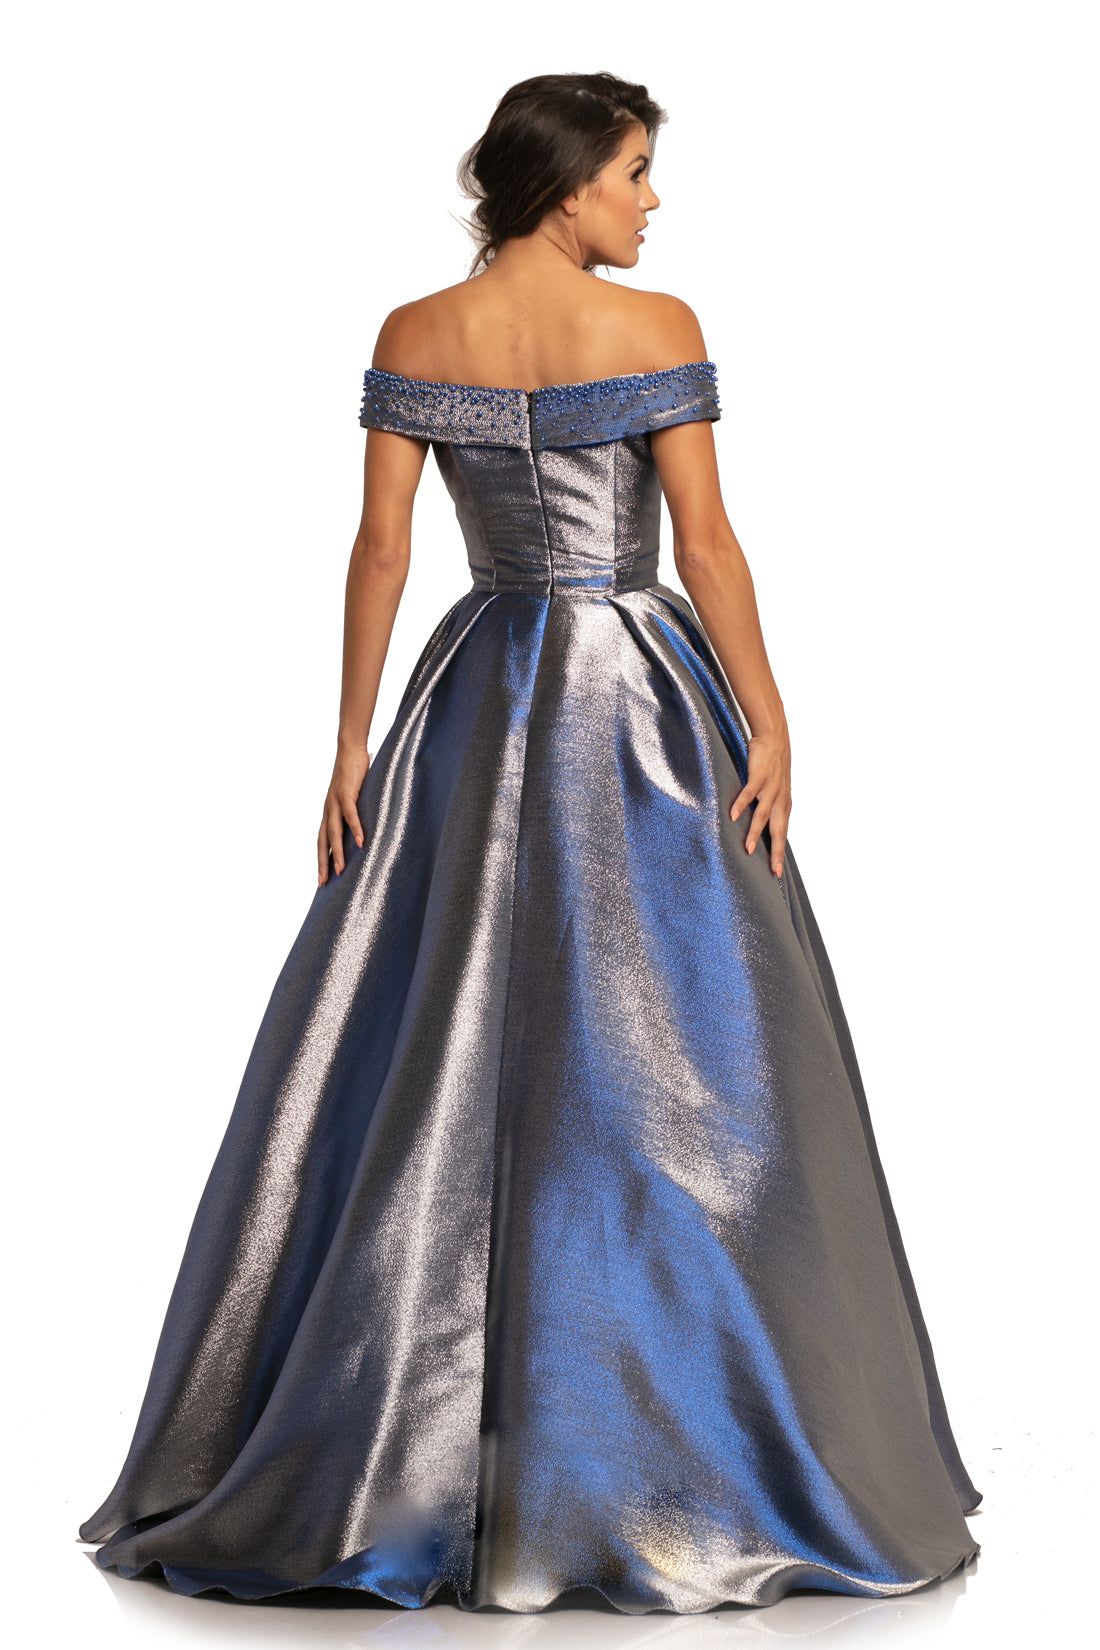 Johnathan Kayne 2072 is an off the shoulder Prom Dress, Pageant Gown & Formal Evening Wear. Featuring a Metallic Shimmer Brocade Material. This Ballgown has a full Pleated skirt, Fitted Off the Shoulder Bodice with pearl embellishments. 